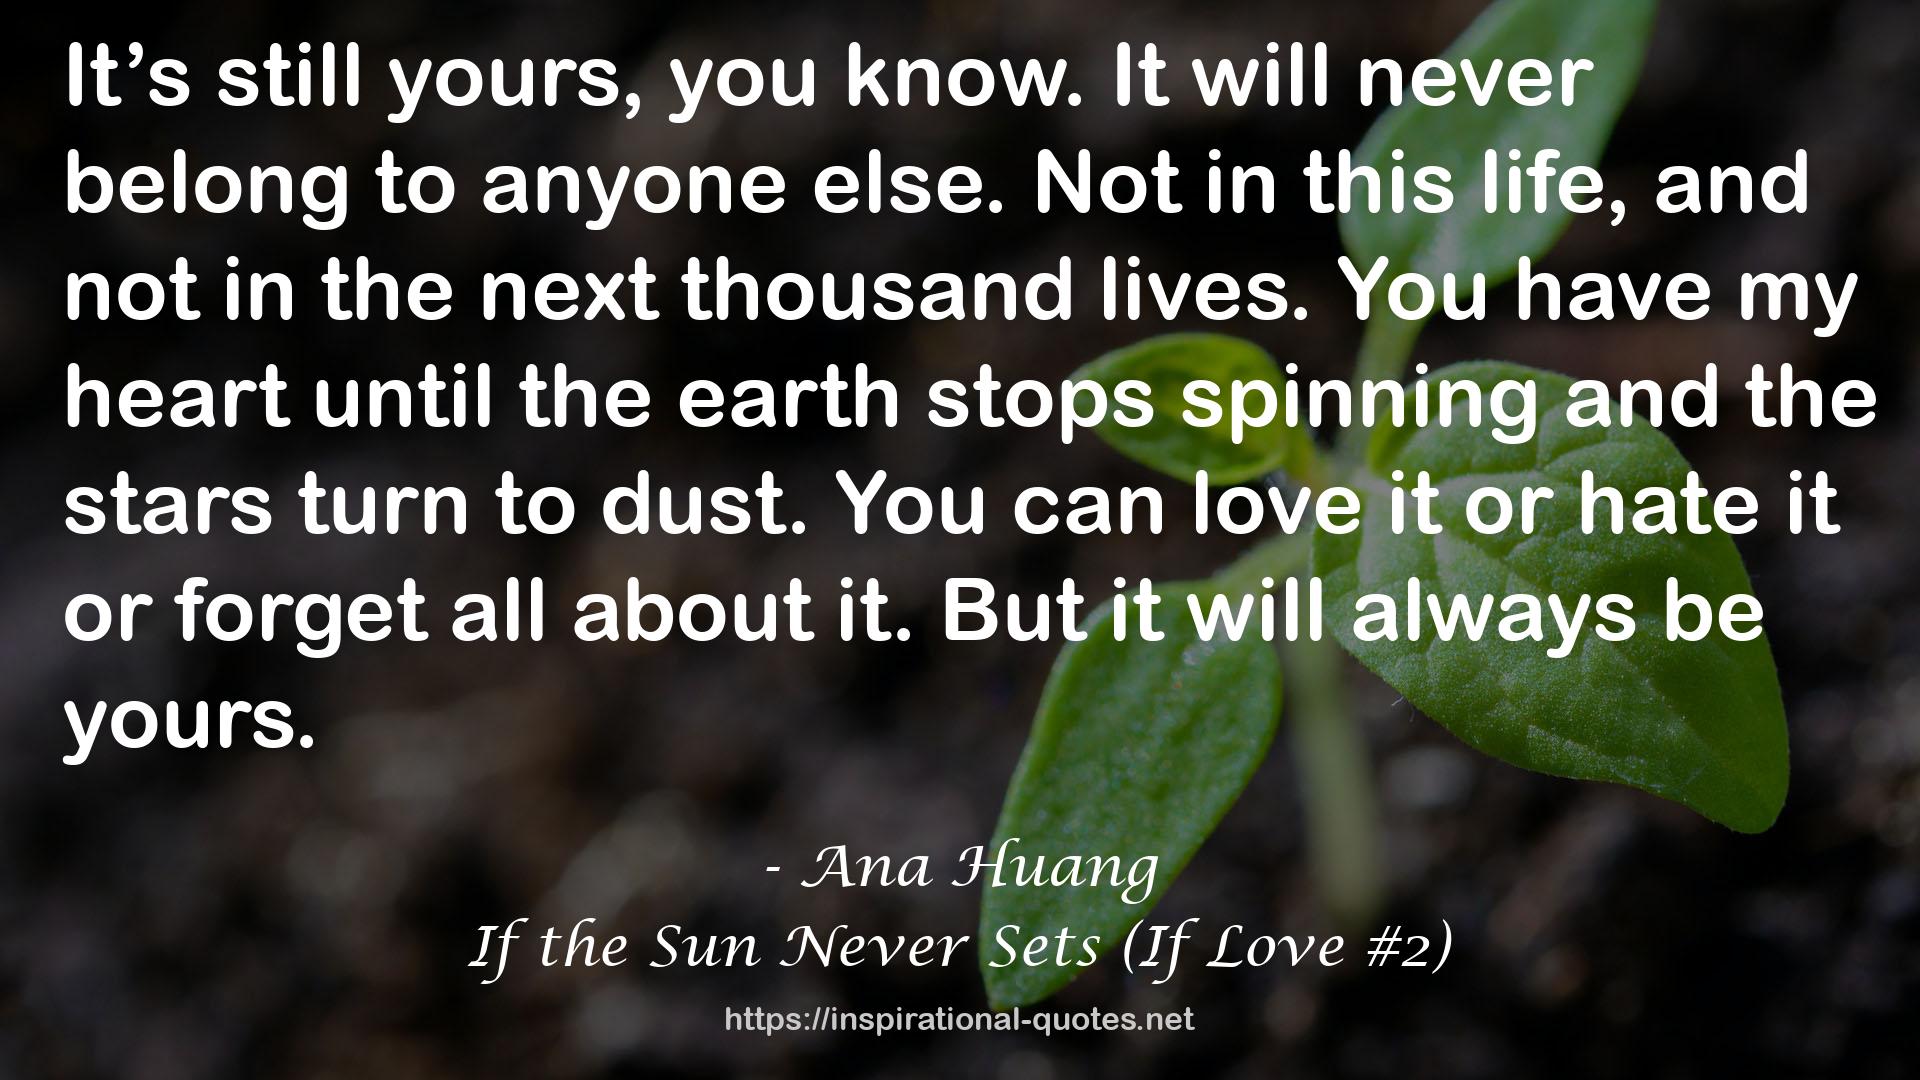 If the Sun Never Sets (If Love #2) QUOTES